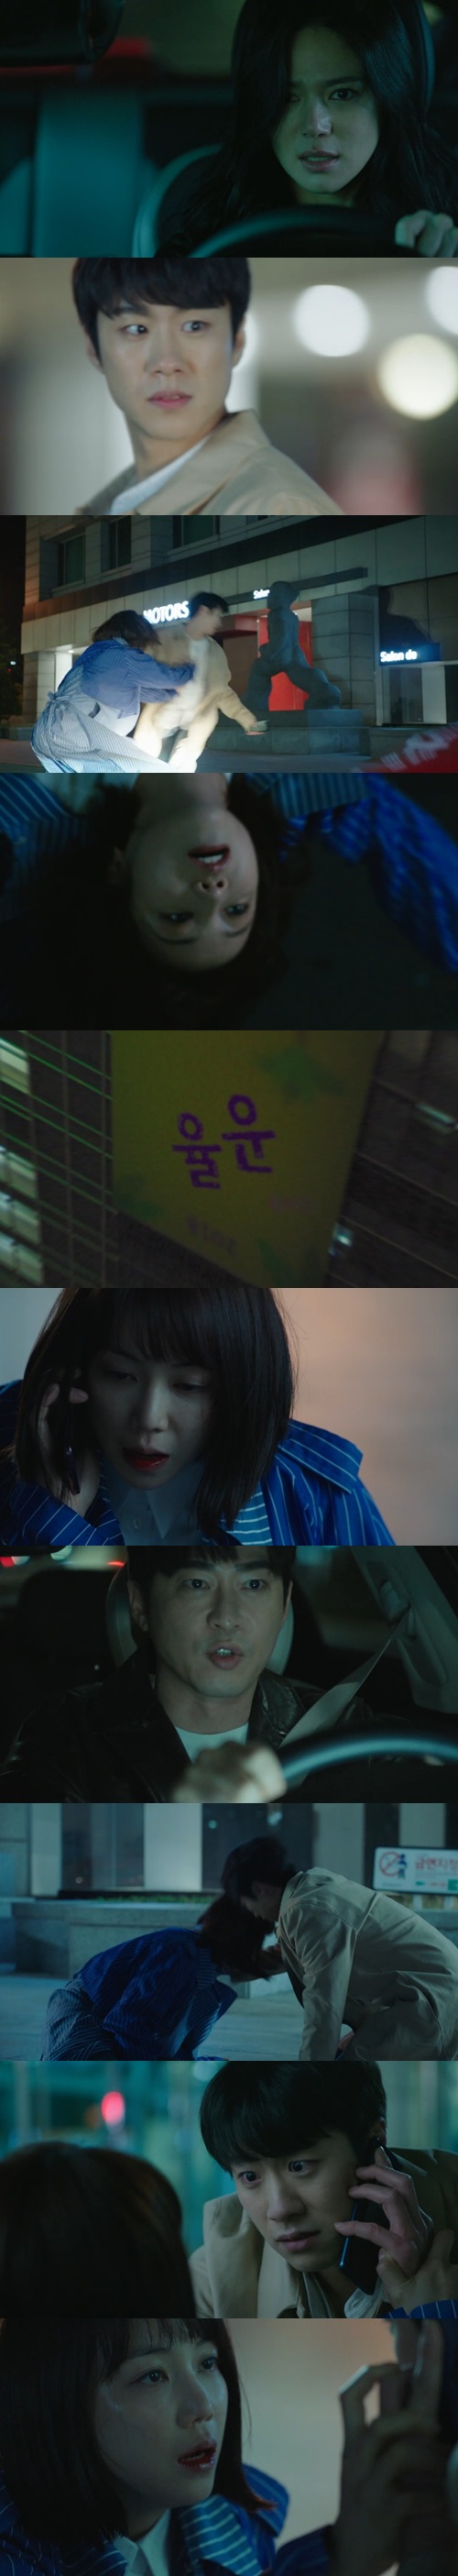 Kim Ok-bin took advantage of the enemy Sim Hee-Seob who killed his father.Gim Dan (Kim Ok-bin minutes) at the OCN Weekend Drama Children of the little God 15th (Screenwriter Hanwoori / Director Kawashima Hyohan) broadcasted on April 21, Lord Hamming who killed the stepfather Kim Hoghi (Anguilgun minutes) (Sim Hee - Seob minutes).Limited stock (Lee Jae Young minutes) gave a candidate for the 20th presidential election after 7 days Weekly Humming gave a gift to Gim Dan, who gave it back but received a return, expressed a change in the mind as he threw away his health bracelet.At that time JANE (Kang · Ji-hwan) and Gim Dan published books seized at Tian Church earlier.JANE wrote 47 billion won of backing money in the lobby of the political circle through a donation illegal laundry donkey (Chunghyun) wrote.Looking at the news that limits, Lord Hamming who laughed, It took me 24 years to go up to here, but it does not take 2 minutes and 40 seconds when it goes down stood up and turned over the board.Prior to limiting, he declined about crime of executing without recognizing illegal money that he received money at the Temple Church via a public apology.Also, let the citizen deter the limiting president to try to resign.A citizen who got up stood up, I wrote the money.The candidate got inside the rent that I flew unjustly and other citizens also said, I was given my daughter intractable surgery expenses.That money was not a candidate, I received it. Gim Dan smiled as despicable, JANE laughed, Sensibilitys arm is against Shigetoda?Public opinion turning point JANE ahead of the election 5 days later revealed that group suicide case of heavens gate group is murder.There was no restricted stock price that main Lord Hamming was a prosecutor at that time, and JANE father Jeong Seung-hwan of the police who first took off to the scene of the incident answered that they manipulated the results of autopsy.In the blink of an eye, JANE became shameful to mother the limited week for the fathers past washing.We visited the victims of heavenly gates who limit their elections for three days in a while and mourned, public opinion swings.Meanwhile Gim Dan got a support rate of 4% above the limited week handed down Yu Chol guards, watched the demolished demonstration, they saw the future to die.However, they were only dismissed in the past Yu Cheol candidate, there was no one in the thousand churches nor one with a one - moxa.JANE Gim Dan noticed the strategy of trying to win the limited week by the election by attacking the operating hand Yu-chul gently with their suicide.At the same time Back Ahyeong (Eliya) said that his father Baek Dye-gyu (Lee Hyo Jung) is in jail because he searches for the word Yuruun that he saw in the future he saw in the future, Let s die in anger Let me angry and come searching for Hamming and do not accept my phone Lord Hamming watched the gang bangs together and struck the Lord Hamming in the car.But first saw that figure Gimudan skipped the body.Gim Dan knew the fact that the letters of dinosaurs hit by a car instead of the Lord Hamming collapsed and banished and displayed as Yuruun in reverse.Lord Haming worried Gim Dan who saved himself why so and tried to report to 119, but Gim Dan prevented declaration to be declared and declared that another suicide operation murder case in JANE He told me the location of the occurrence.Gimdan who got angry with Lord Hamming who killed the stepfather Kim Hoggi who raised himself earlier gimmered the sacrifice of taking advantage of such weekly humming, and he was interested in the change in the action of the main humming collected.Also, whether the Jinjo JANE can safely use people to prevent limited winners from winning a prize or a sense of tension was posted in the last round of endings